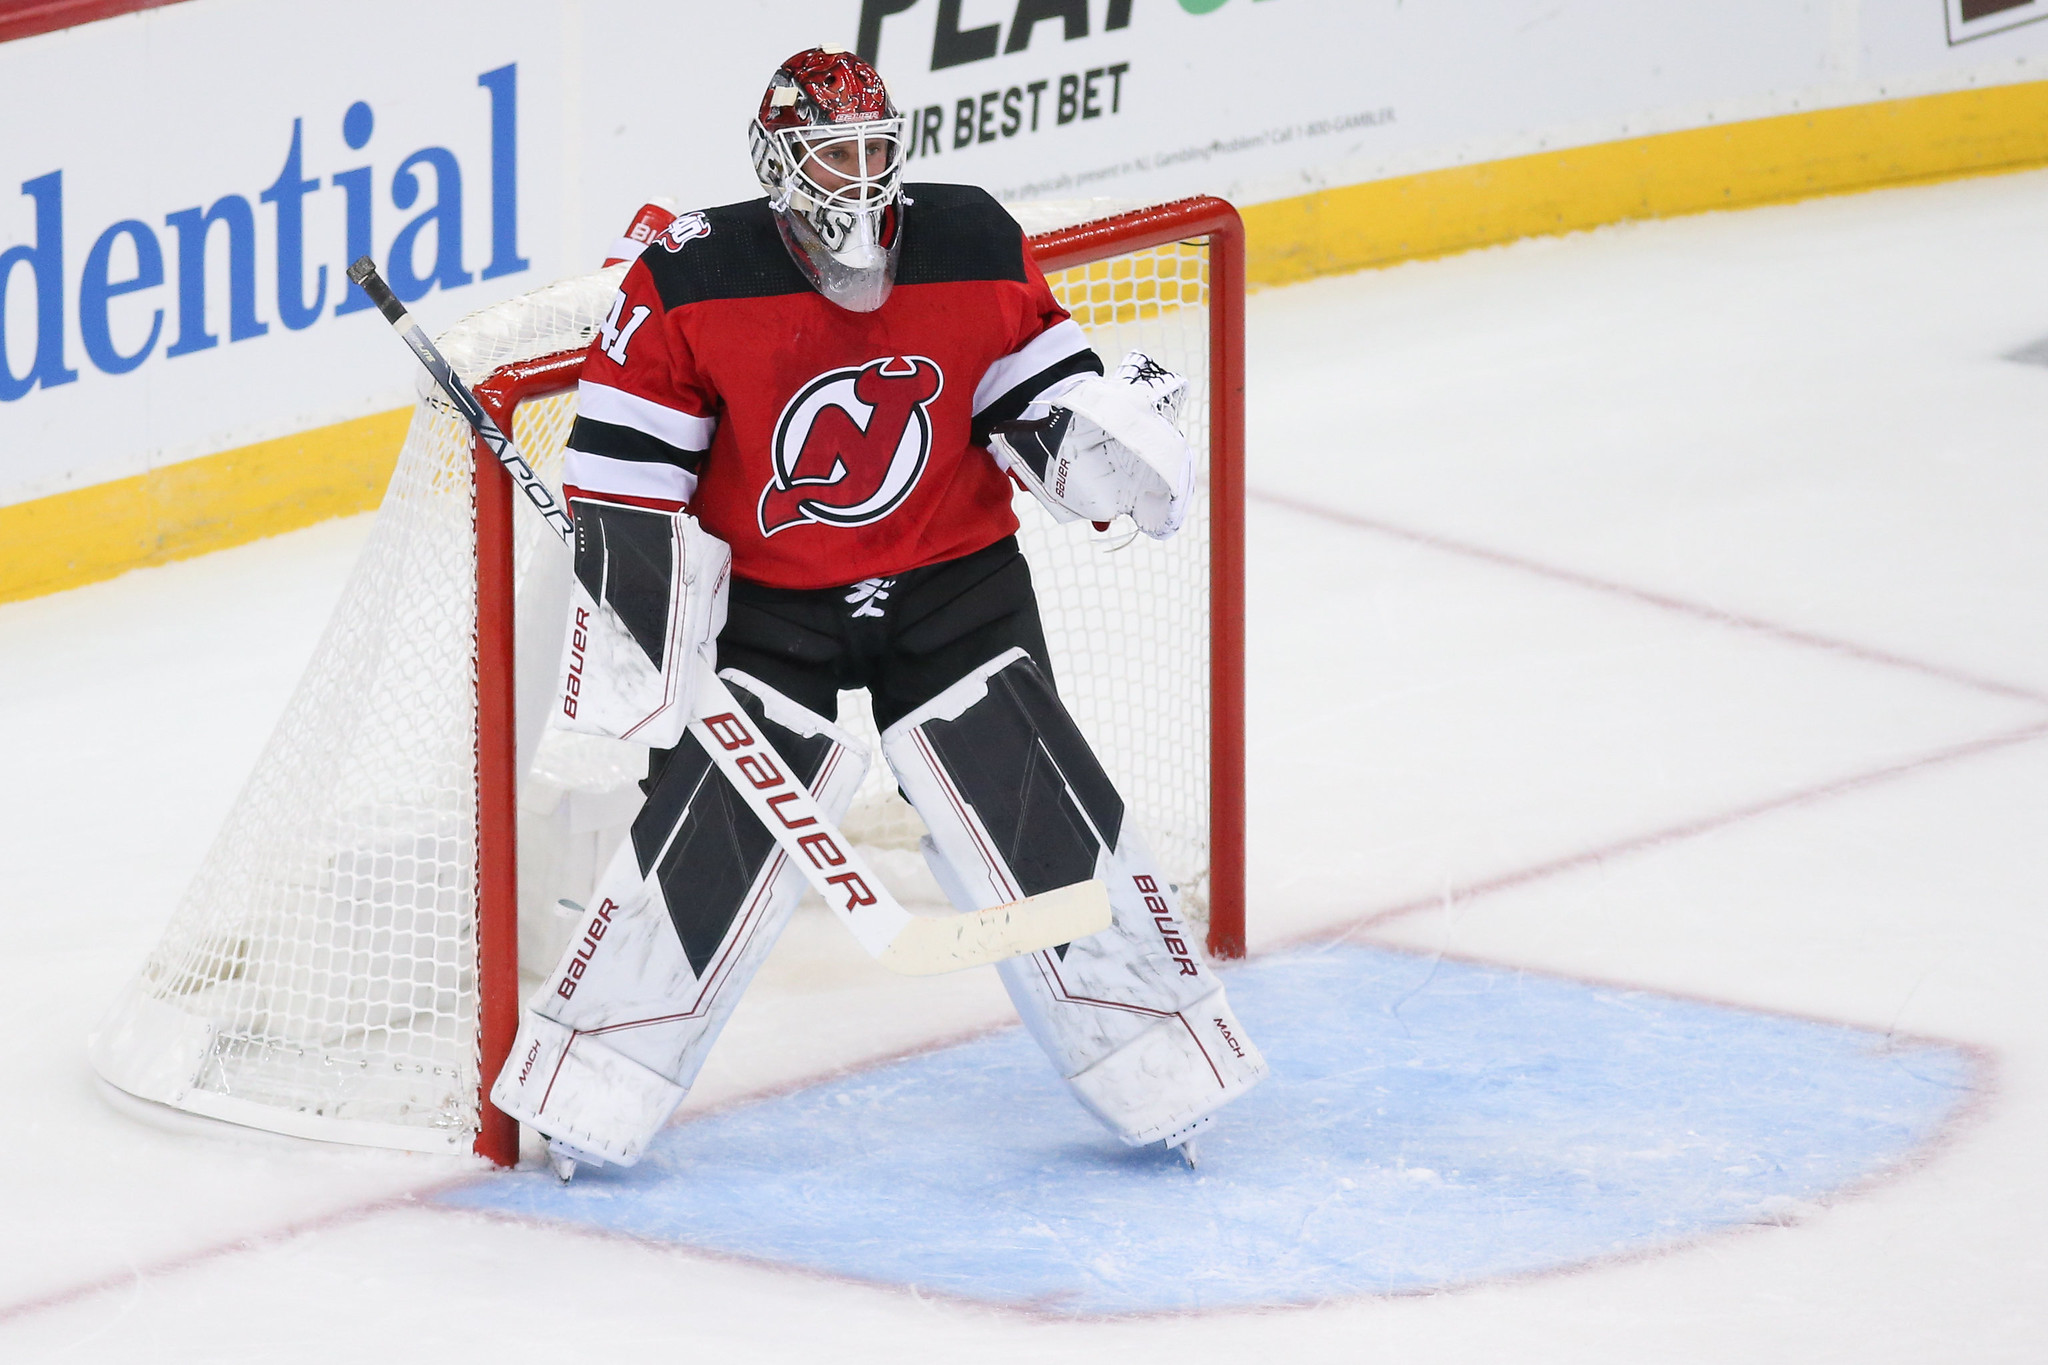 New Jersey Devils stay alive, force Game 6 in Stanley Cup Finals 